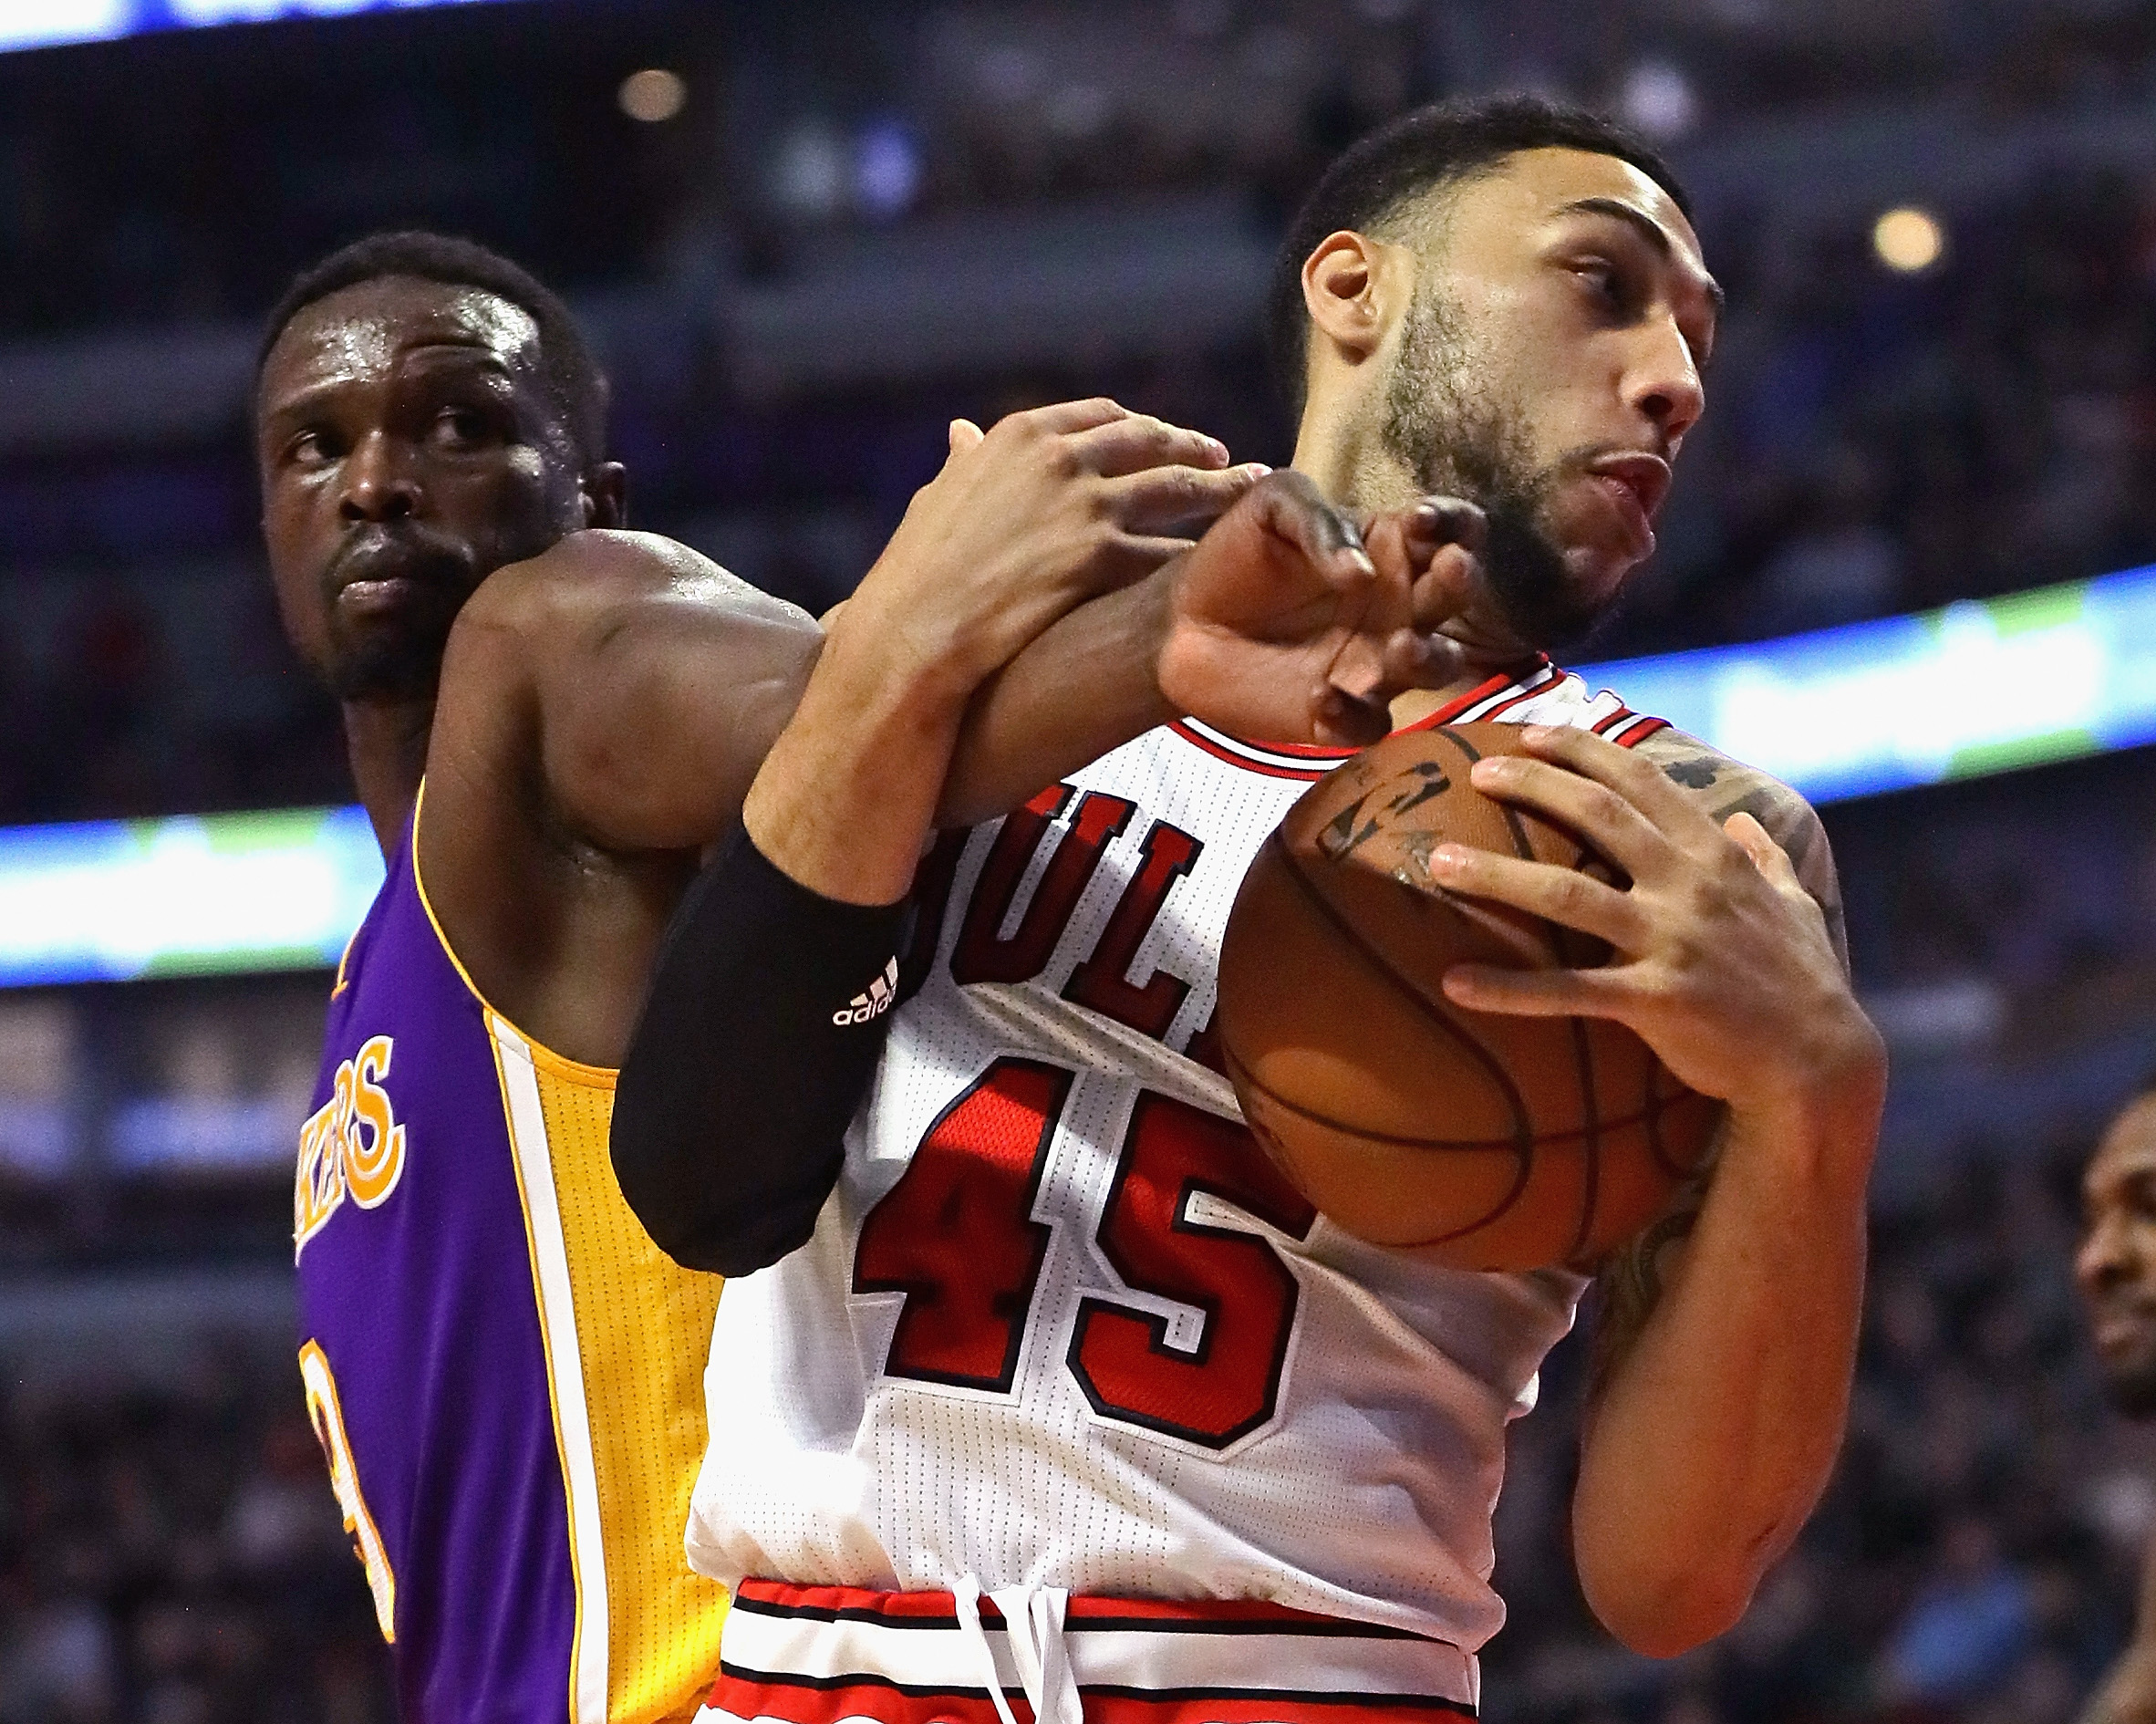 CHICAGO, IL - NOVEMBER 30: Denzel Valentine #45 of the Chicago Bulls and Luol Deng #9 of the Los Angeles Lakers get tangled up at the United Center on November 30, 2016 in Chicago, Illinois. Jonathan Daniel/Getty Images/AFP